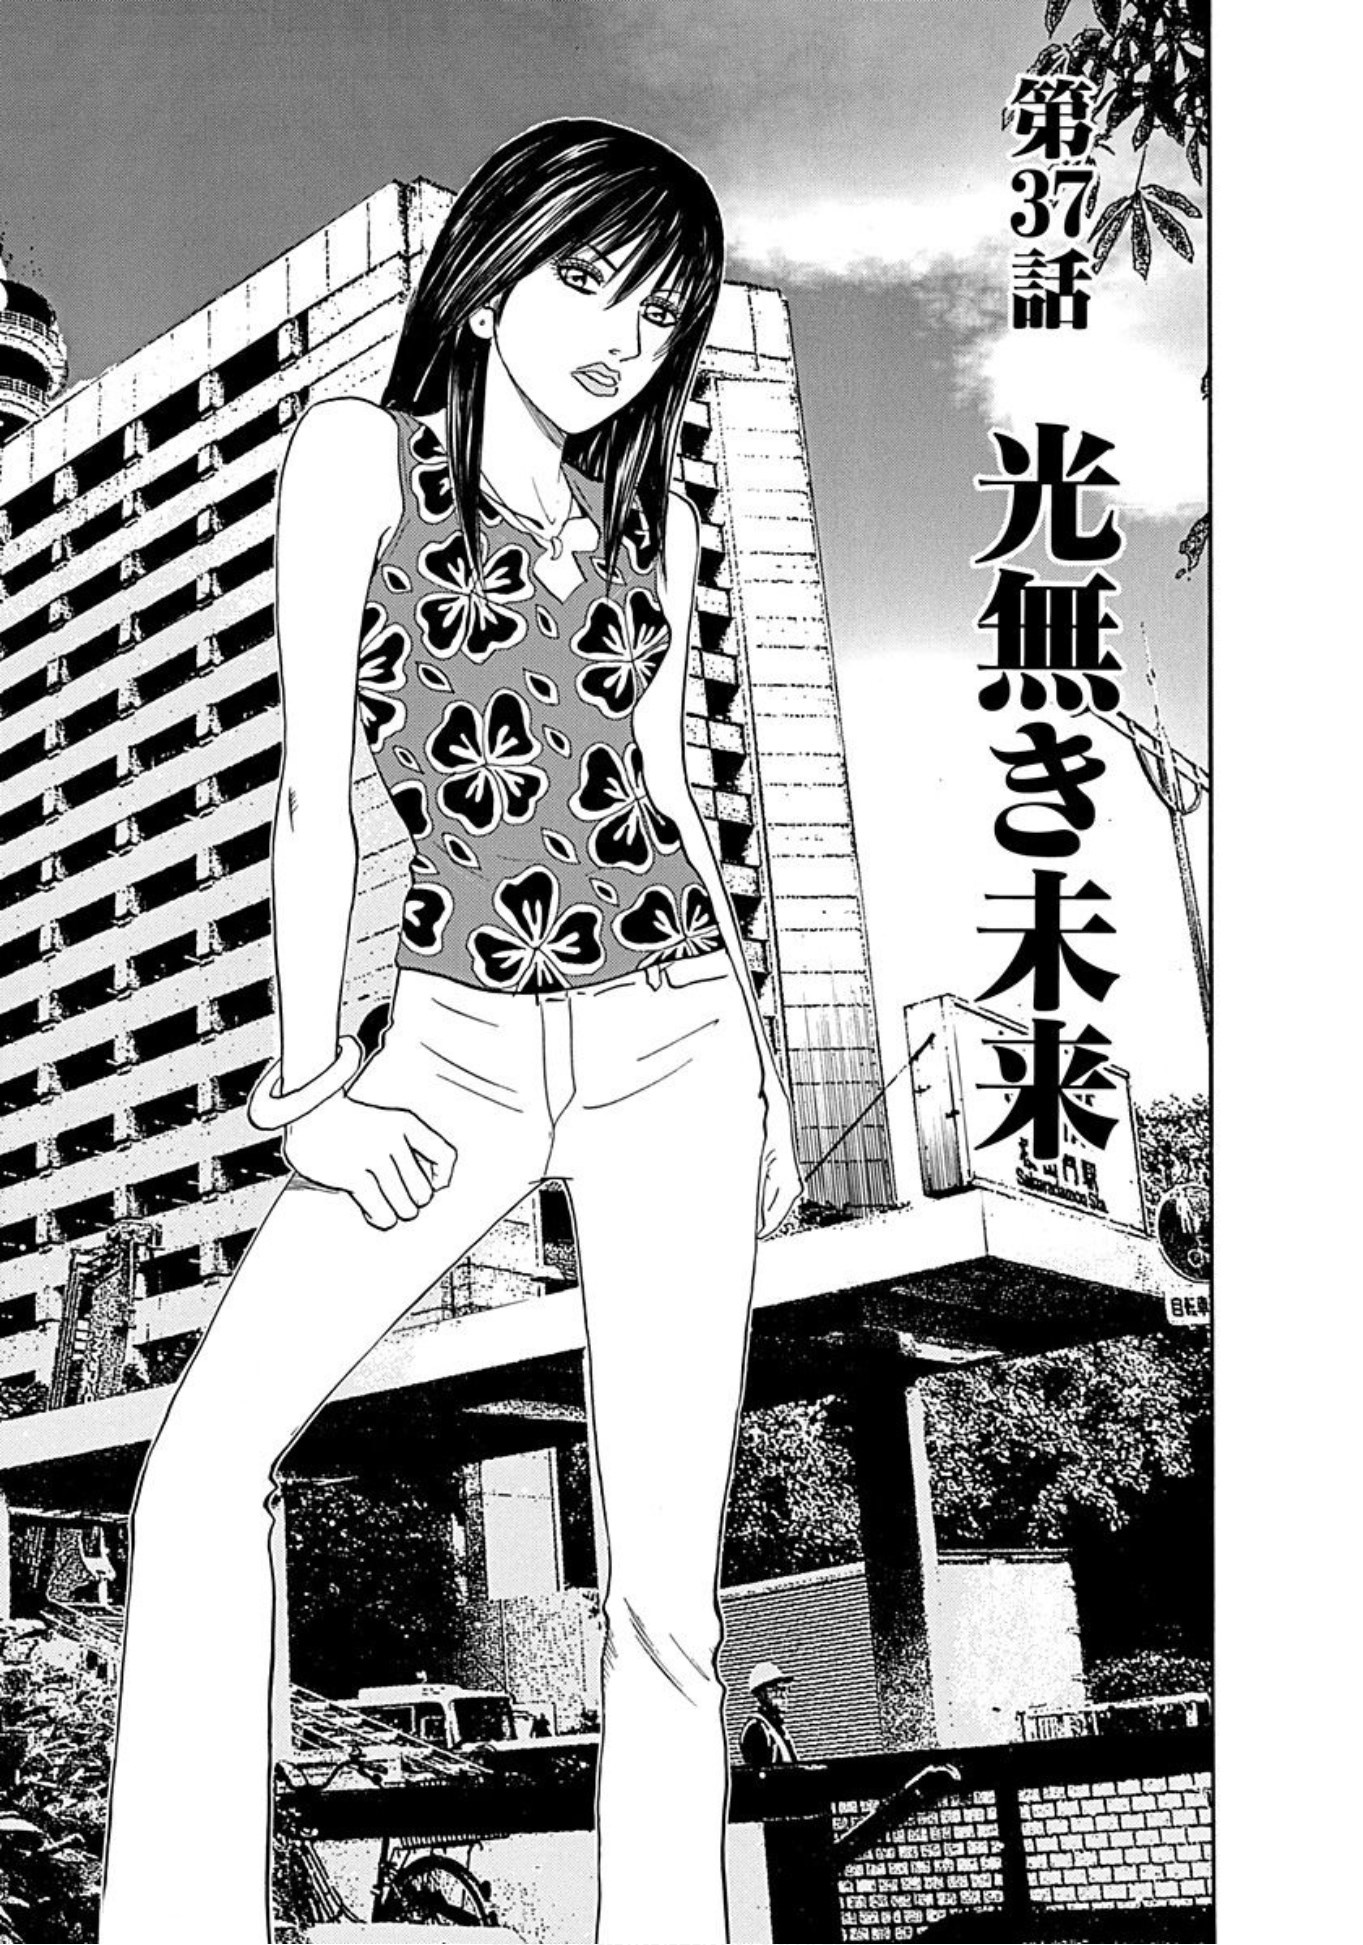 Uramiya Honpo Vol.6 Chapter 37: A Future With Only Darkness - Picture 1